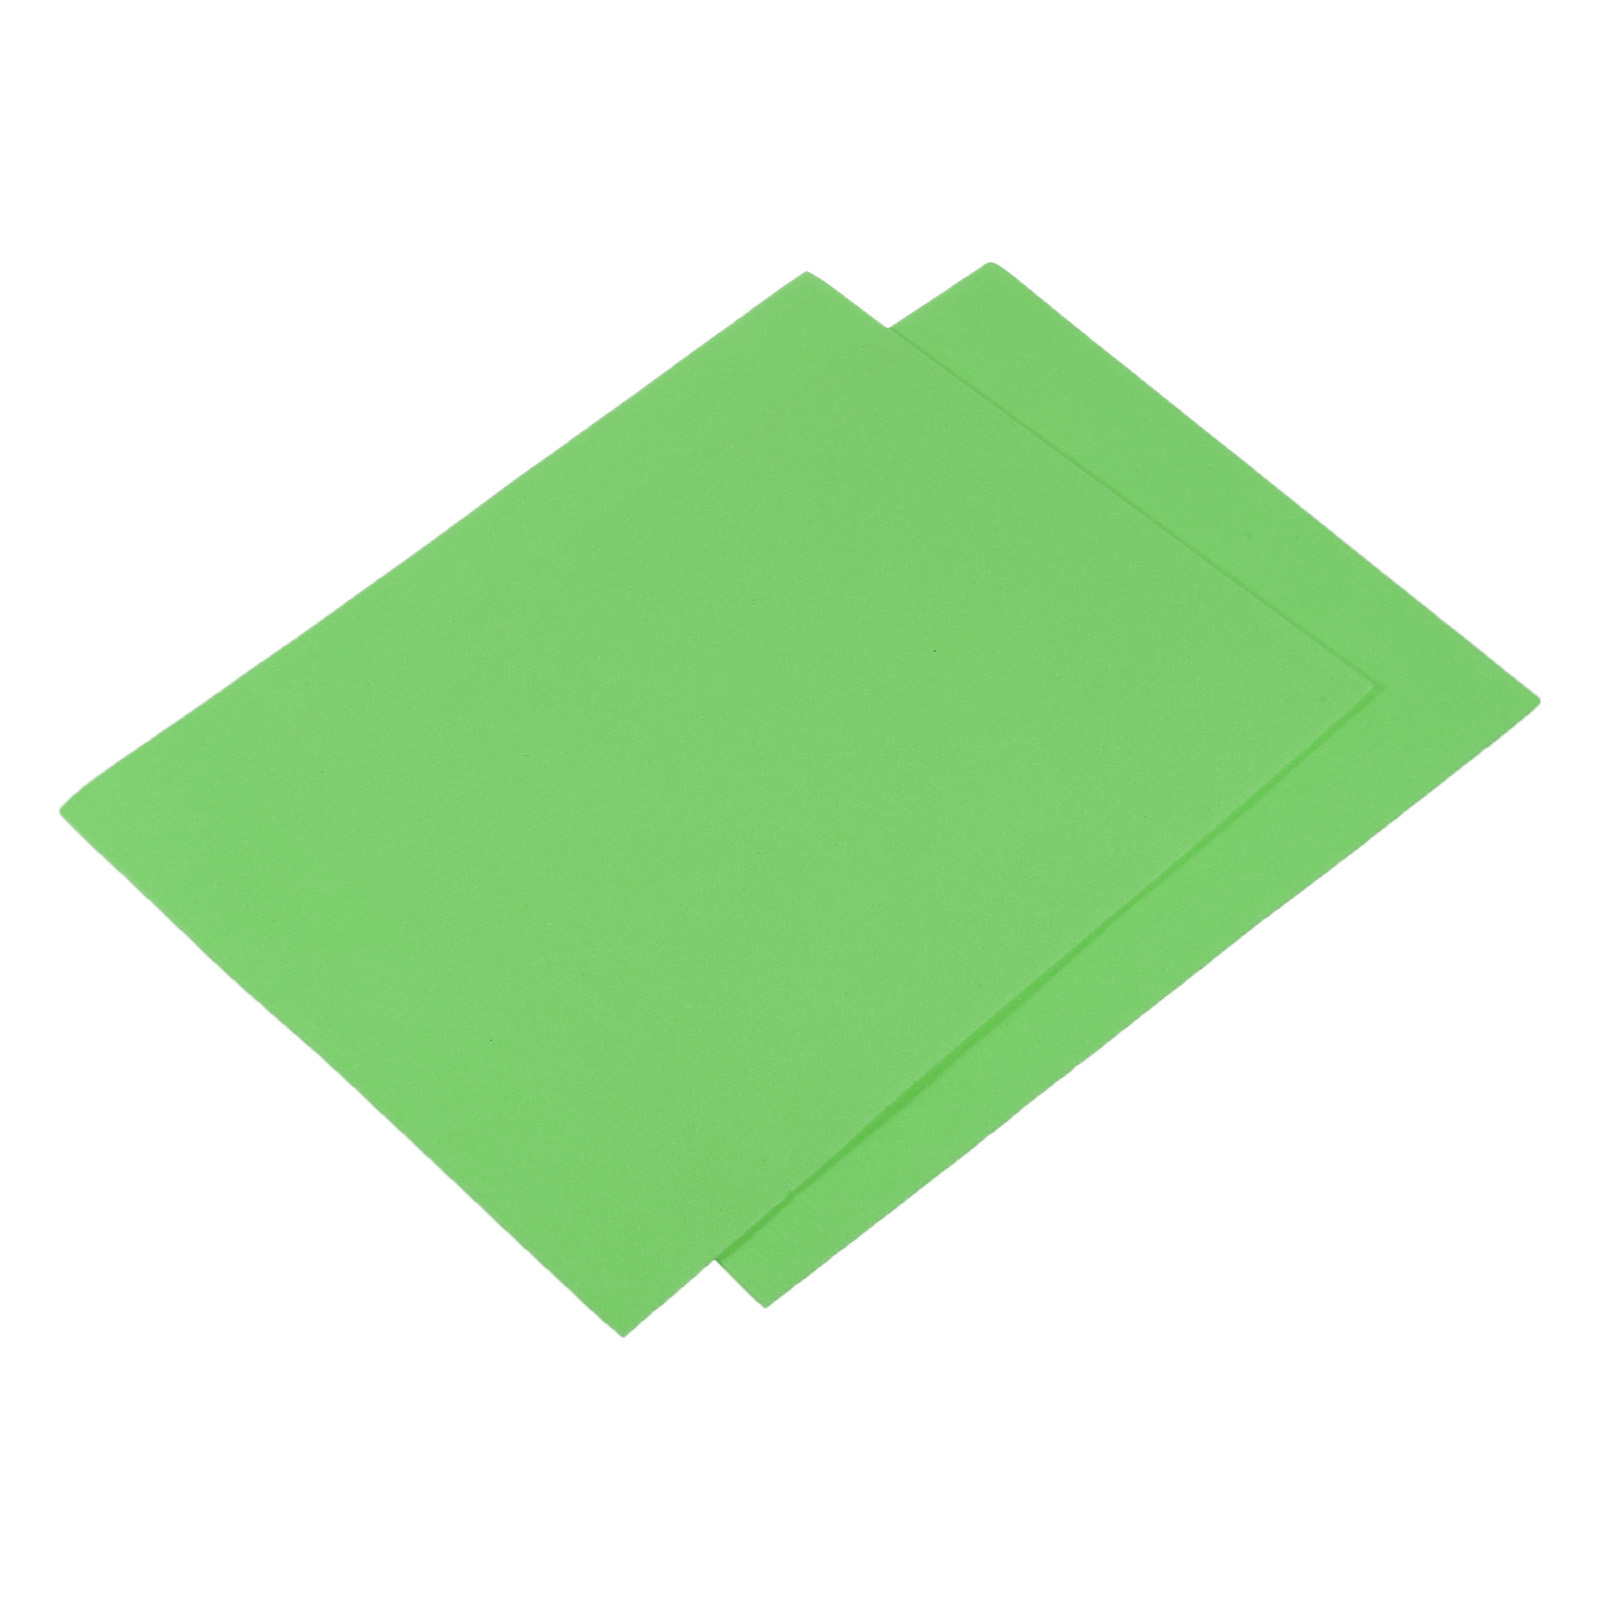 EVA Foam Sheets Green 10.8x8.4 Inch 1.5mm Thickness for Crafts DIY